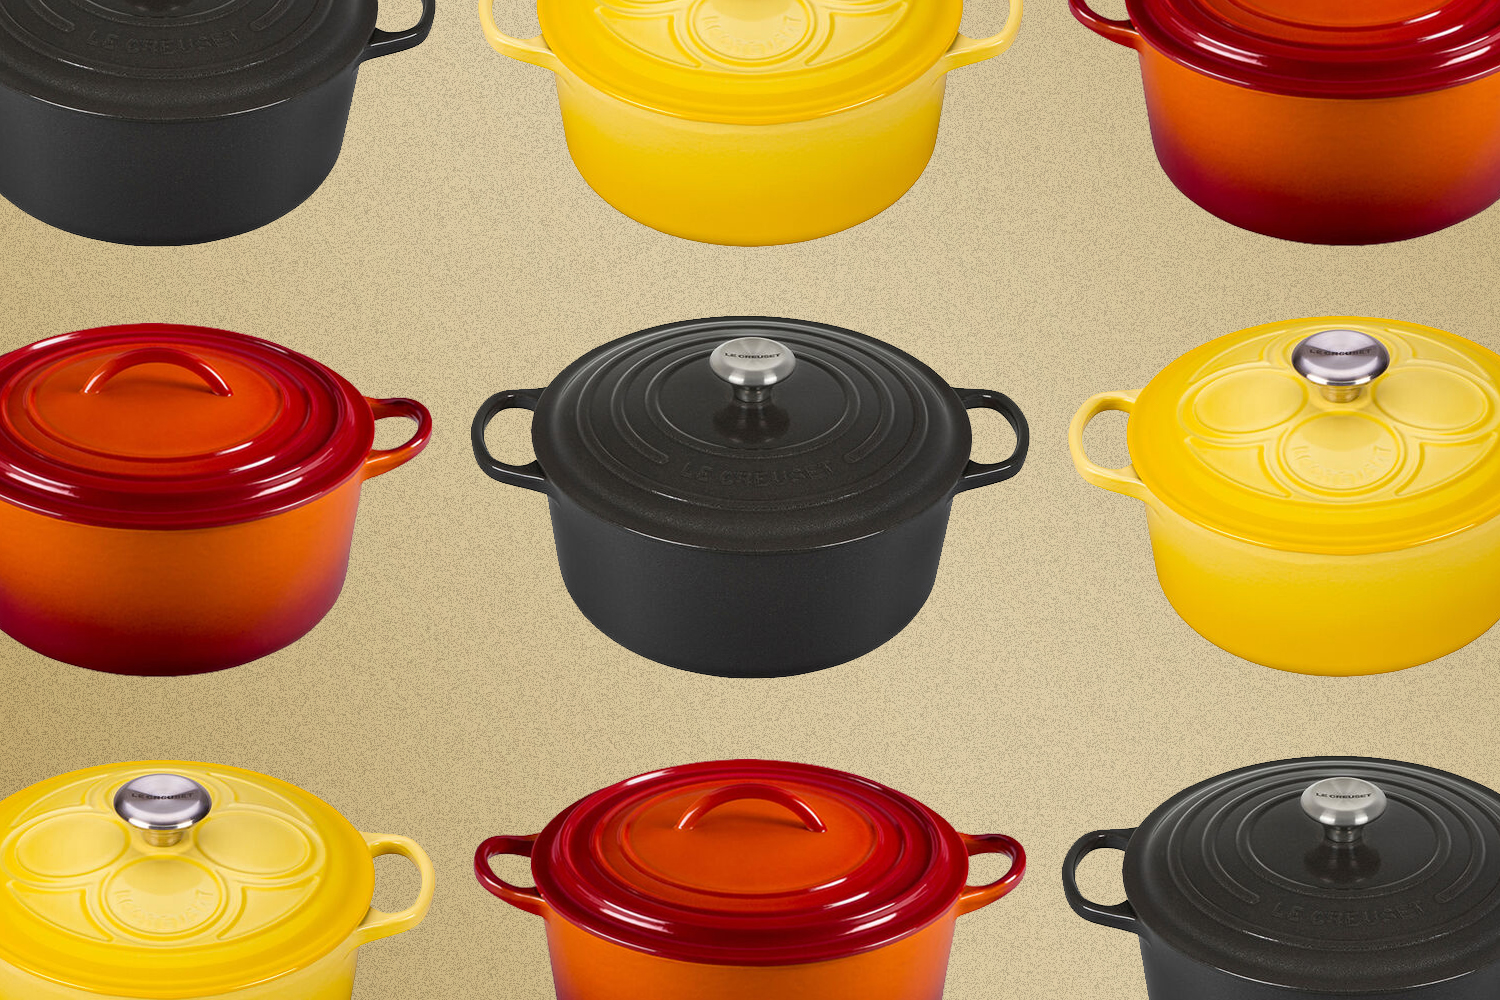 Le Creuset Dutch Ovens 50% Off at the Factory Sale -